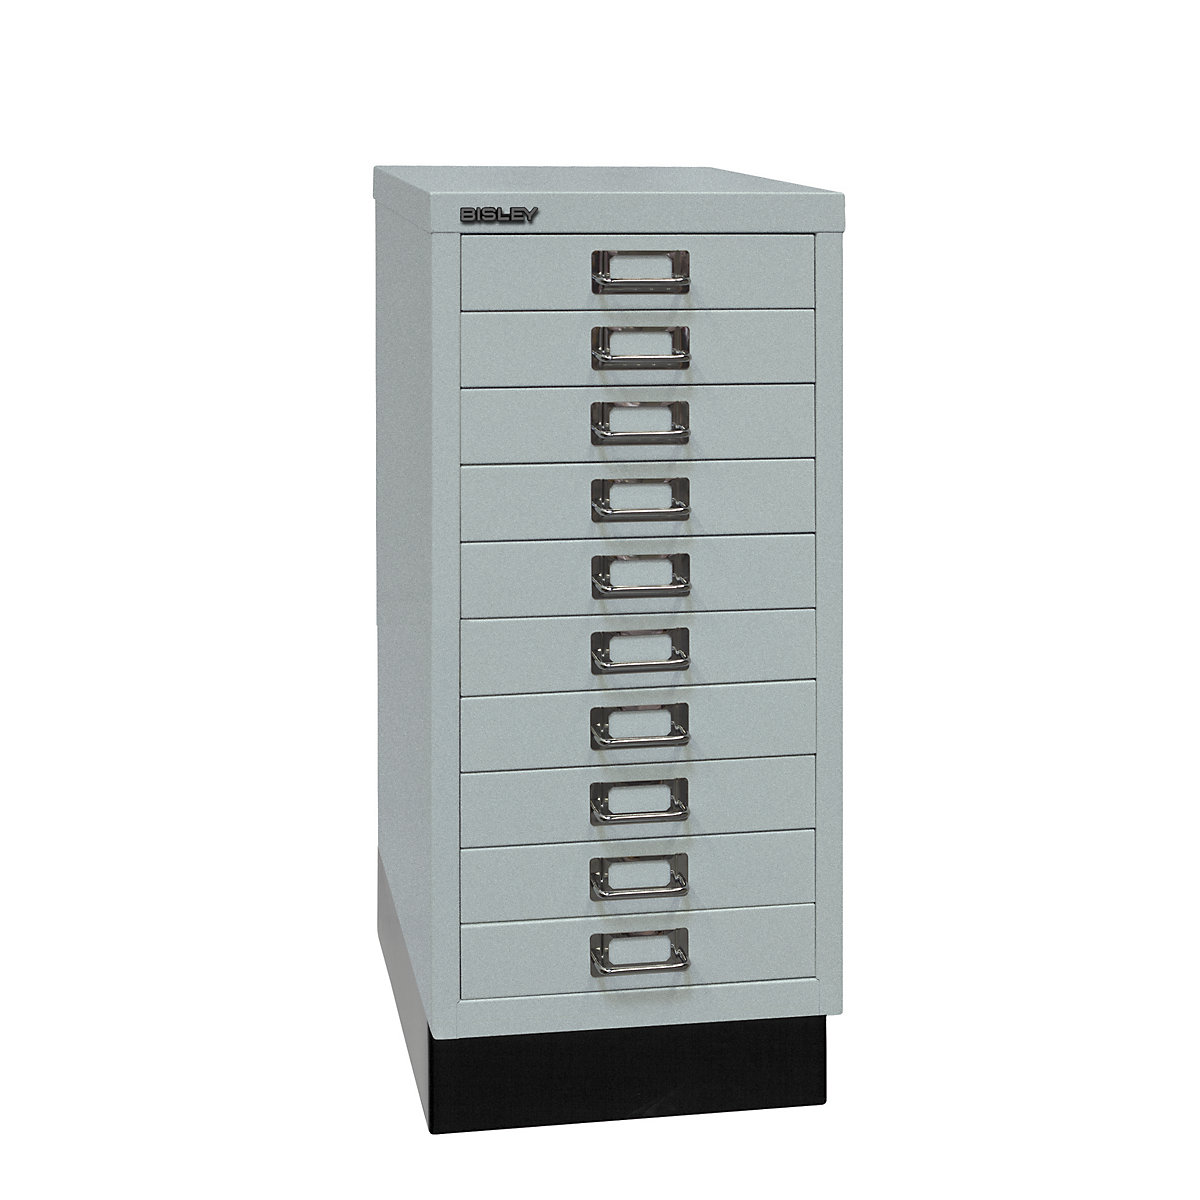 MultiDrawer™ 29 series – BISLEY, with plinth, A4, 10 drawers, silver-6